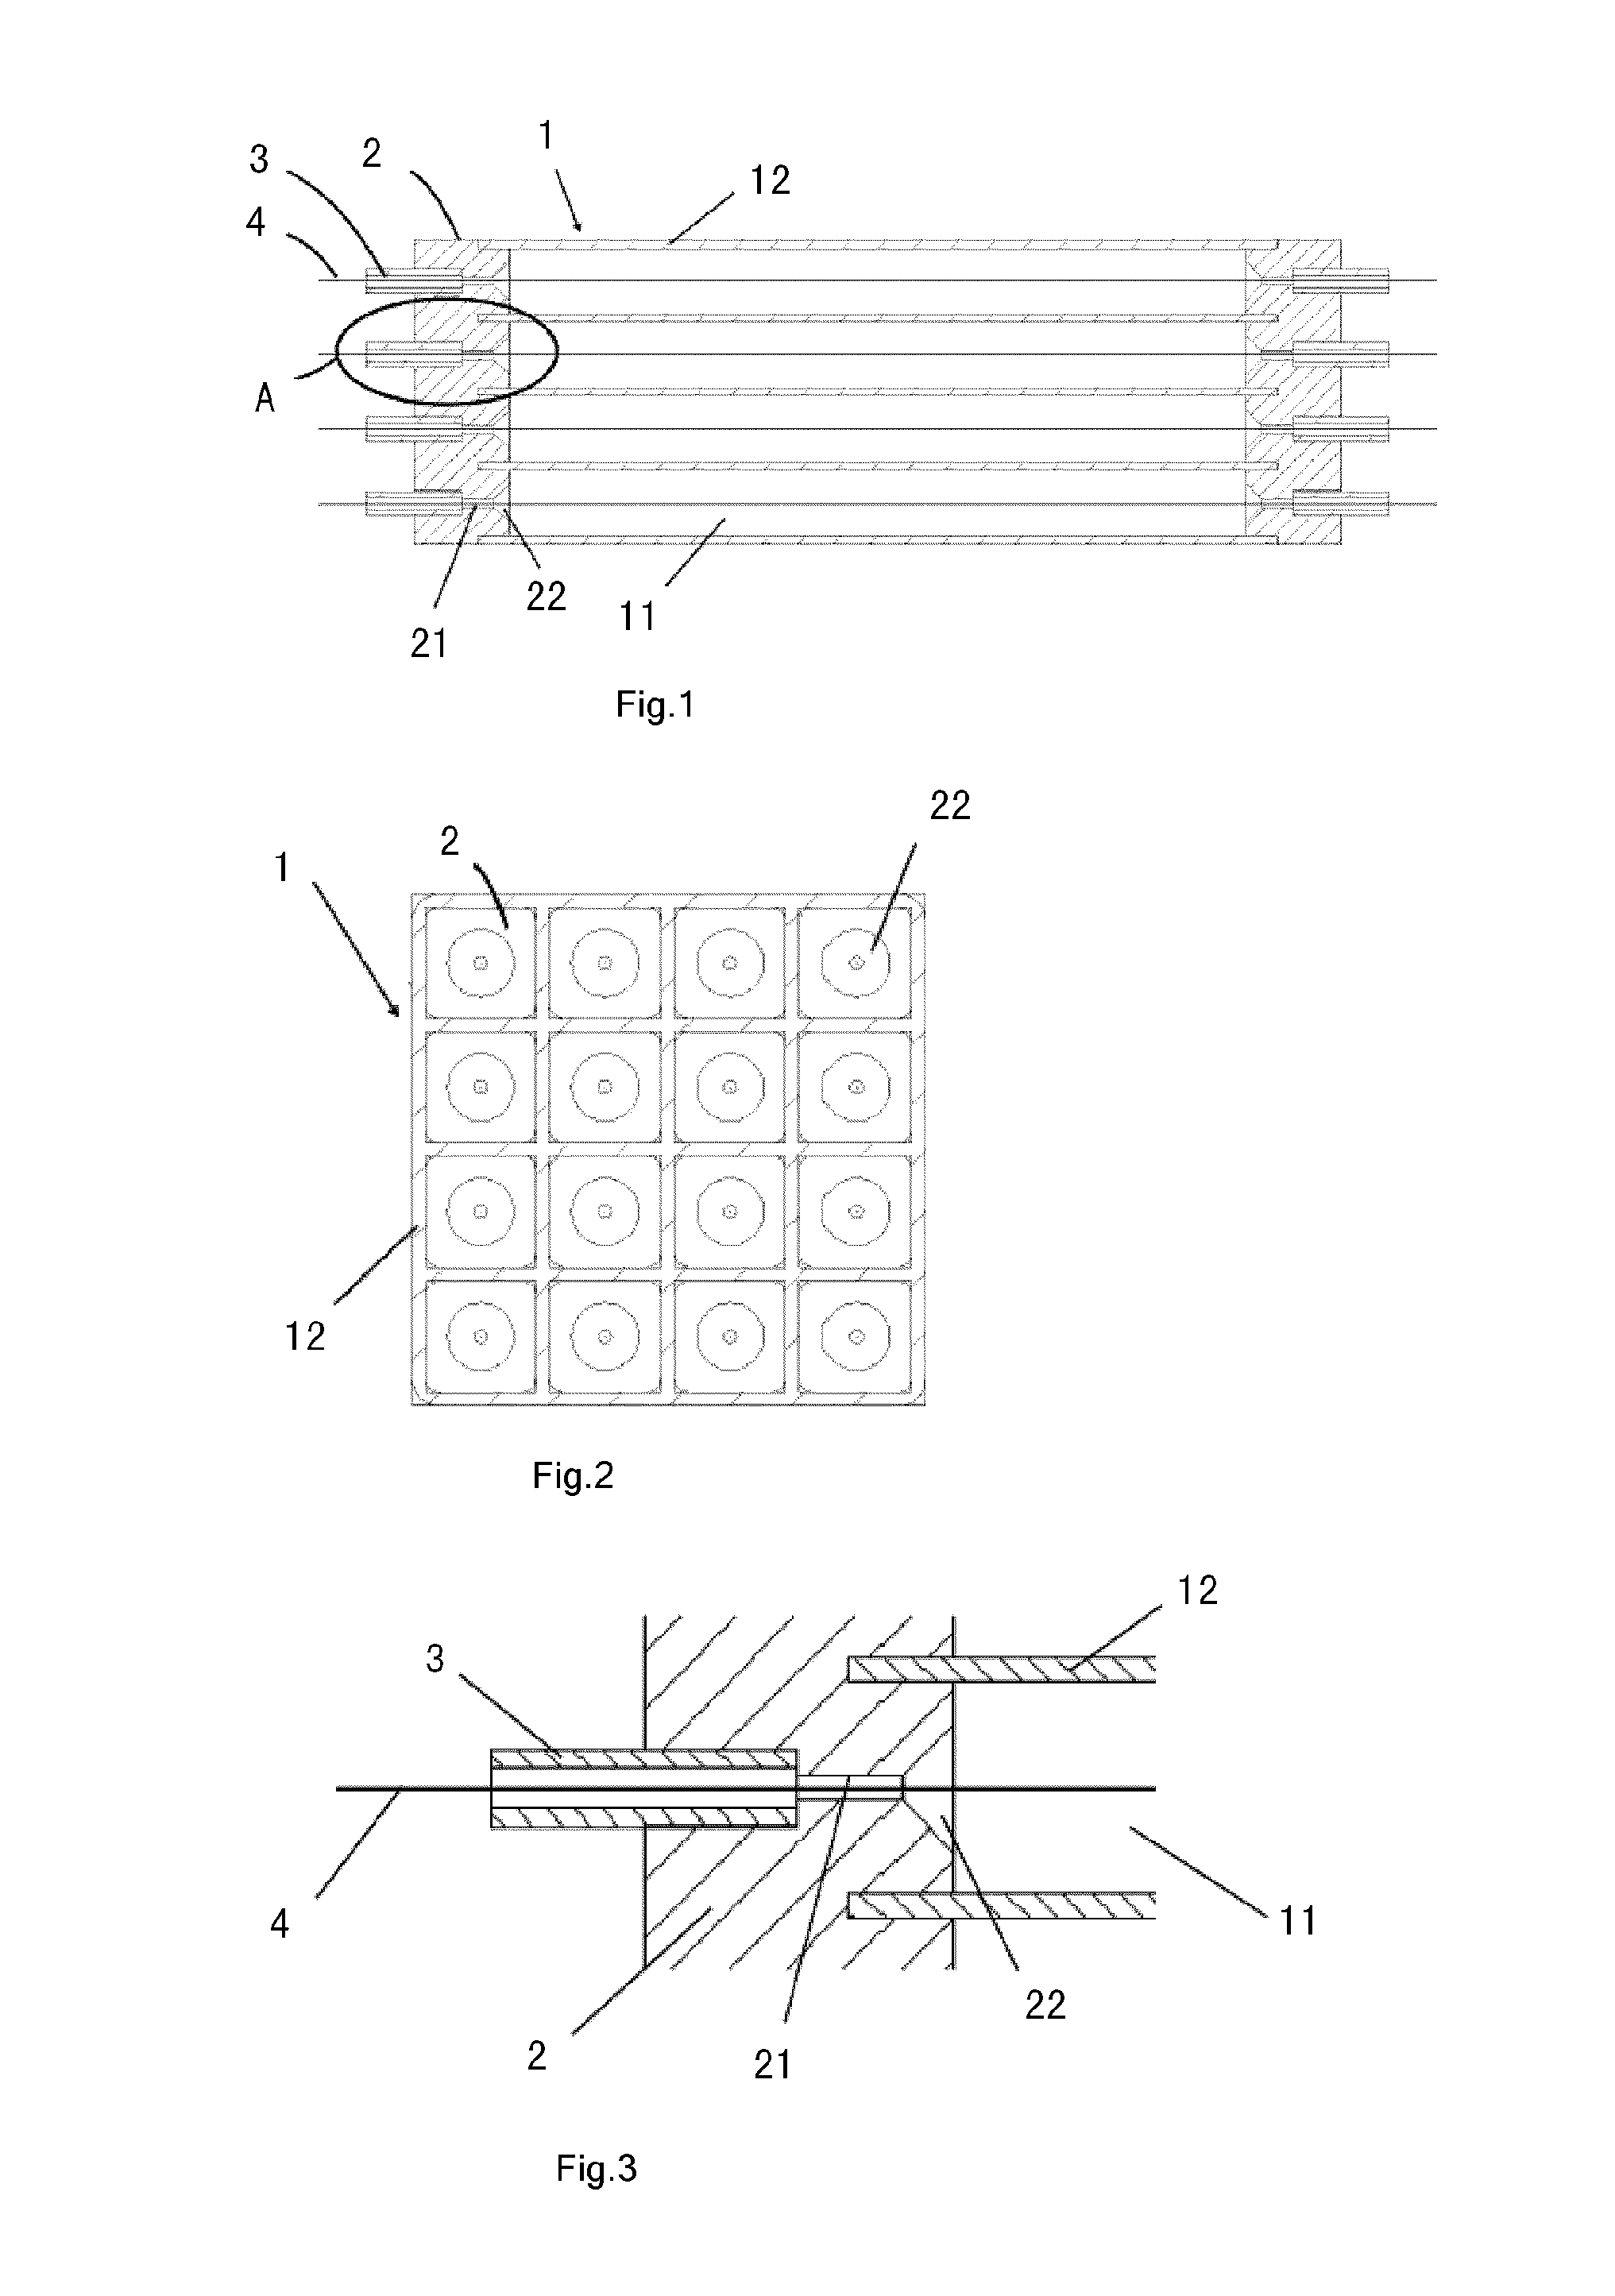 Boron-coated neutron detector and method for manufacturing the same